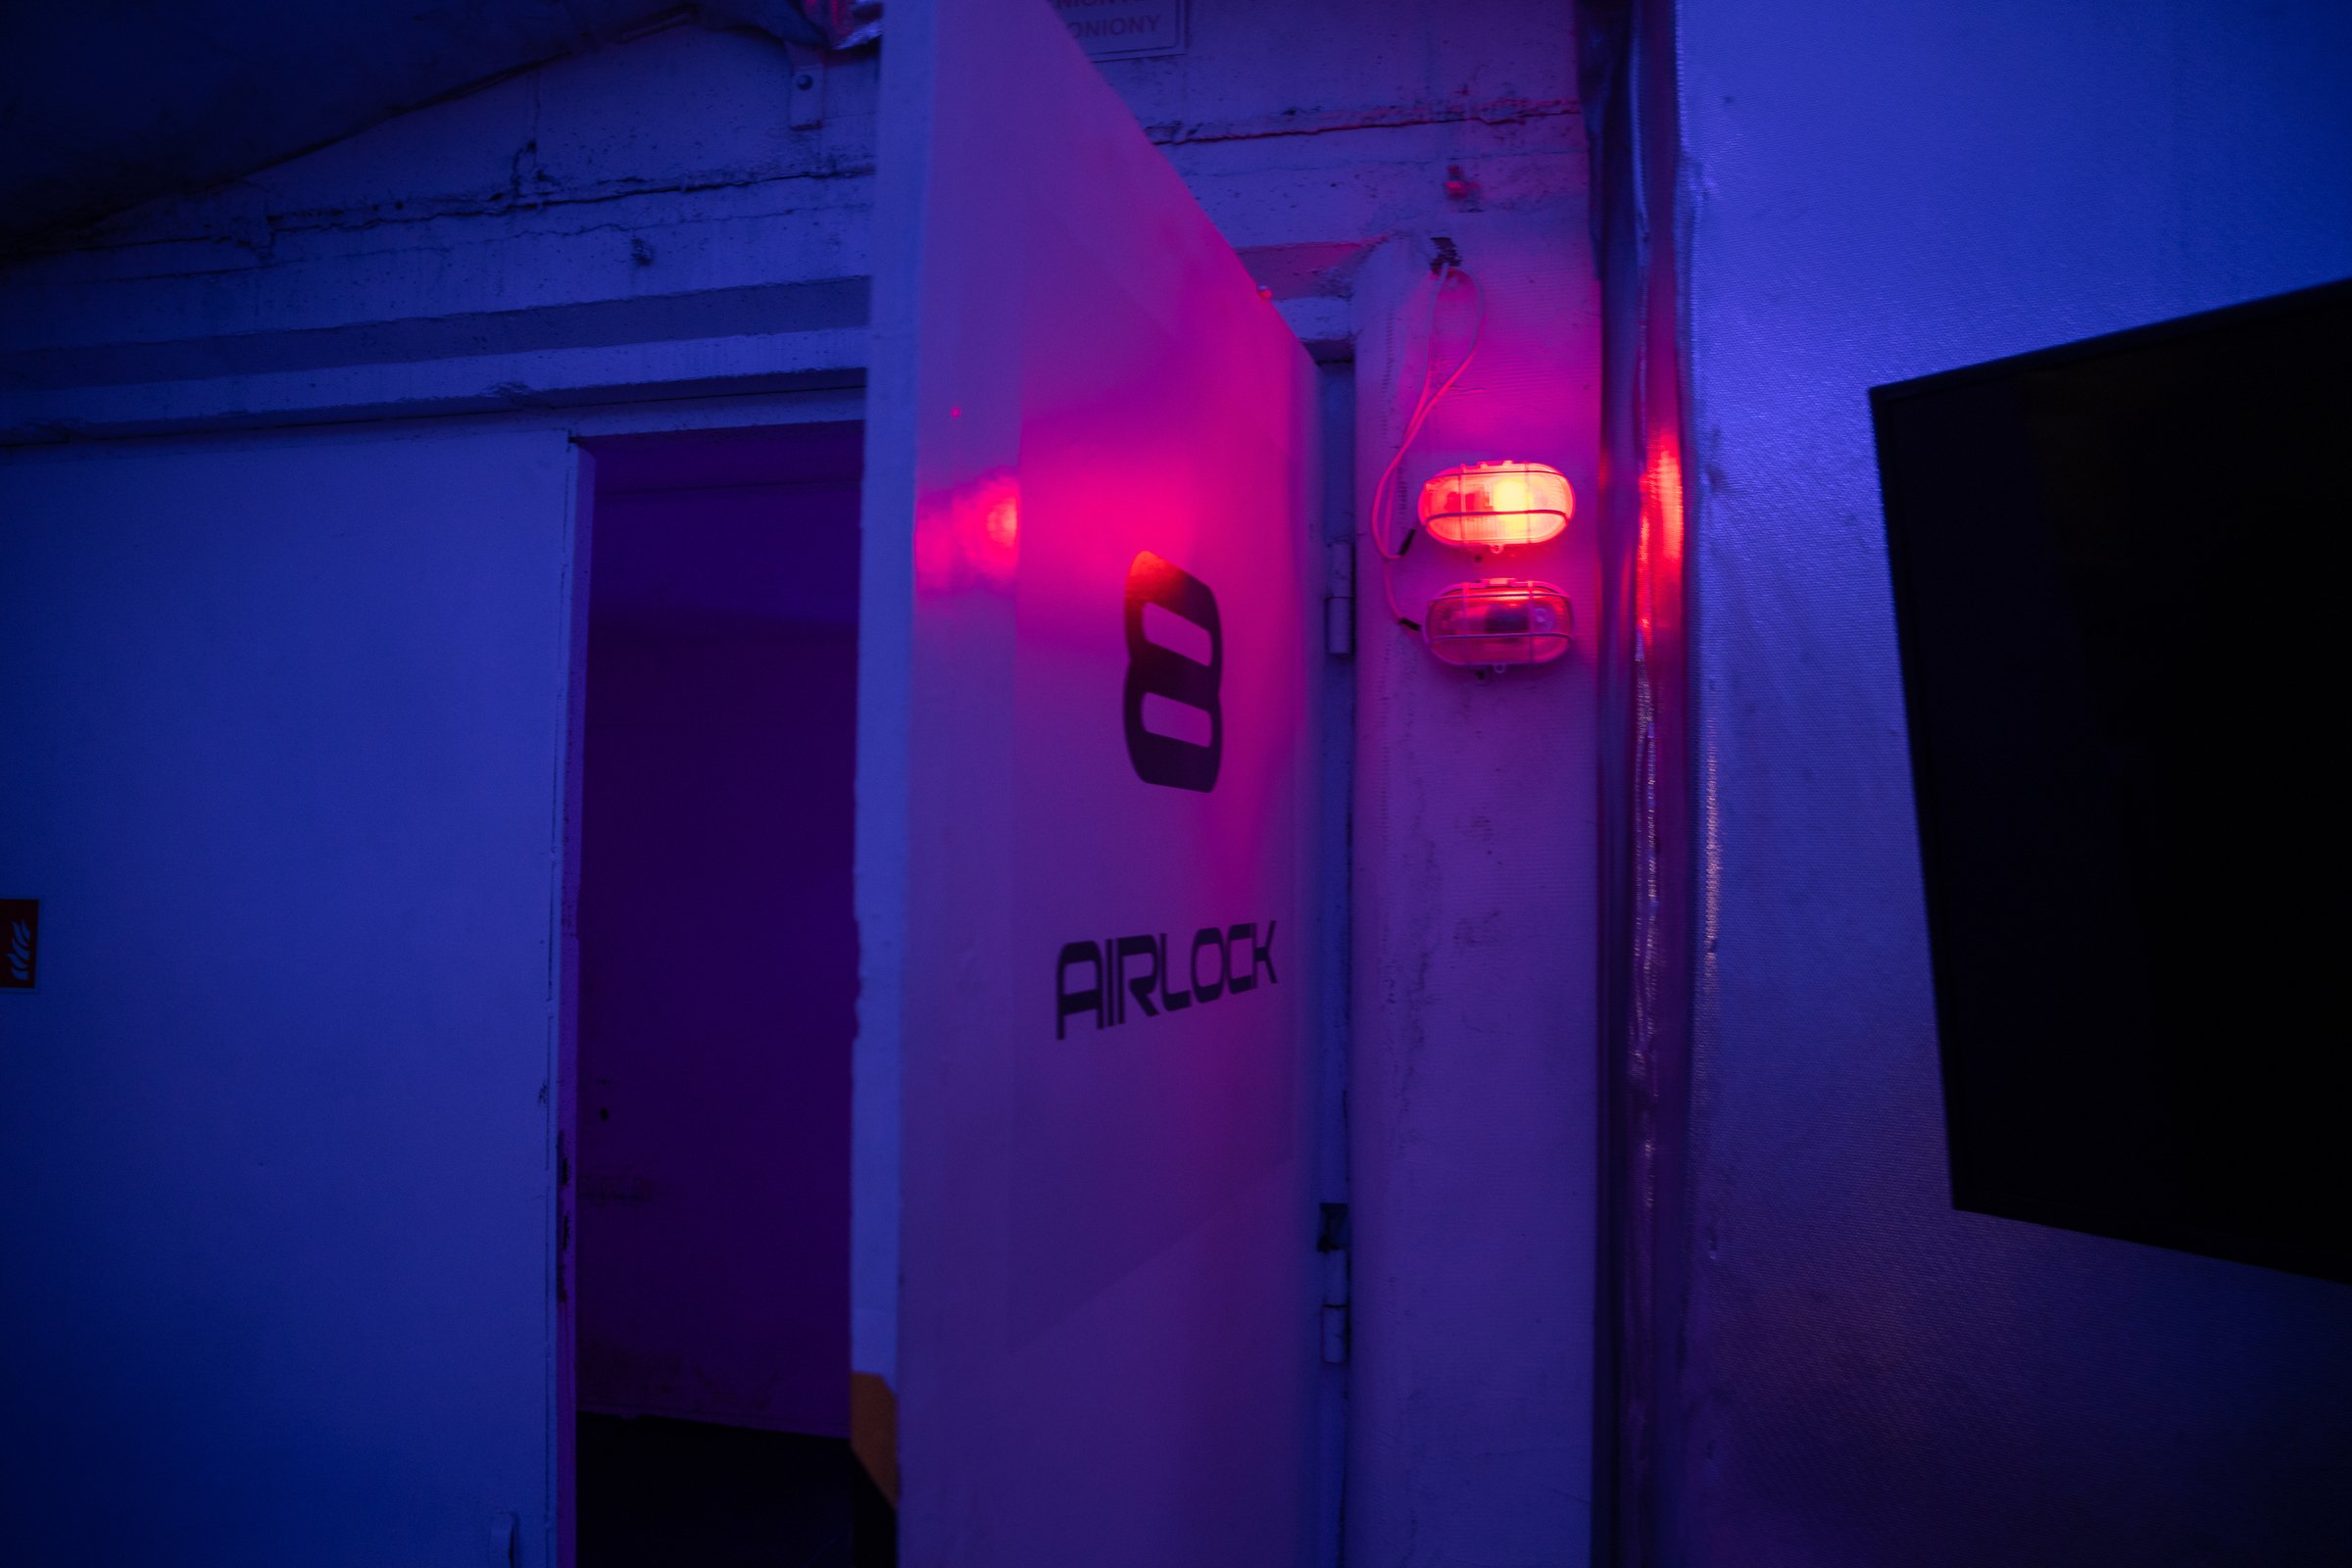  Through this hatch at the Polish Mars analogue simulation base, astronauts leave a Mars base and enter the vacuum of Space to perform extravehicular activities.  